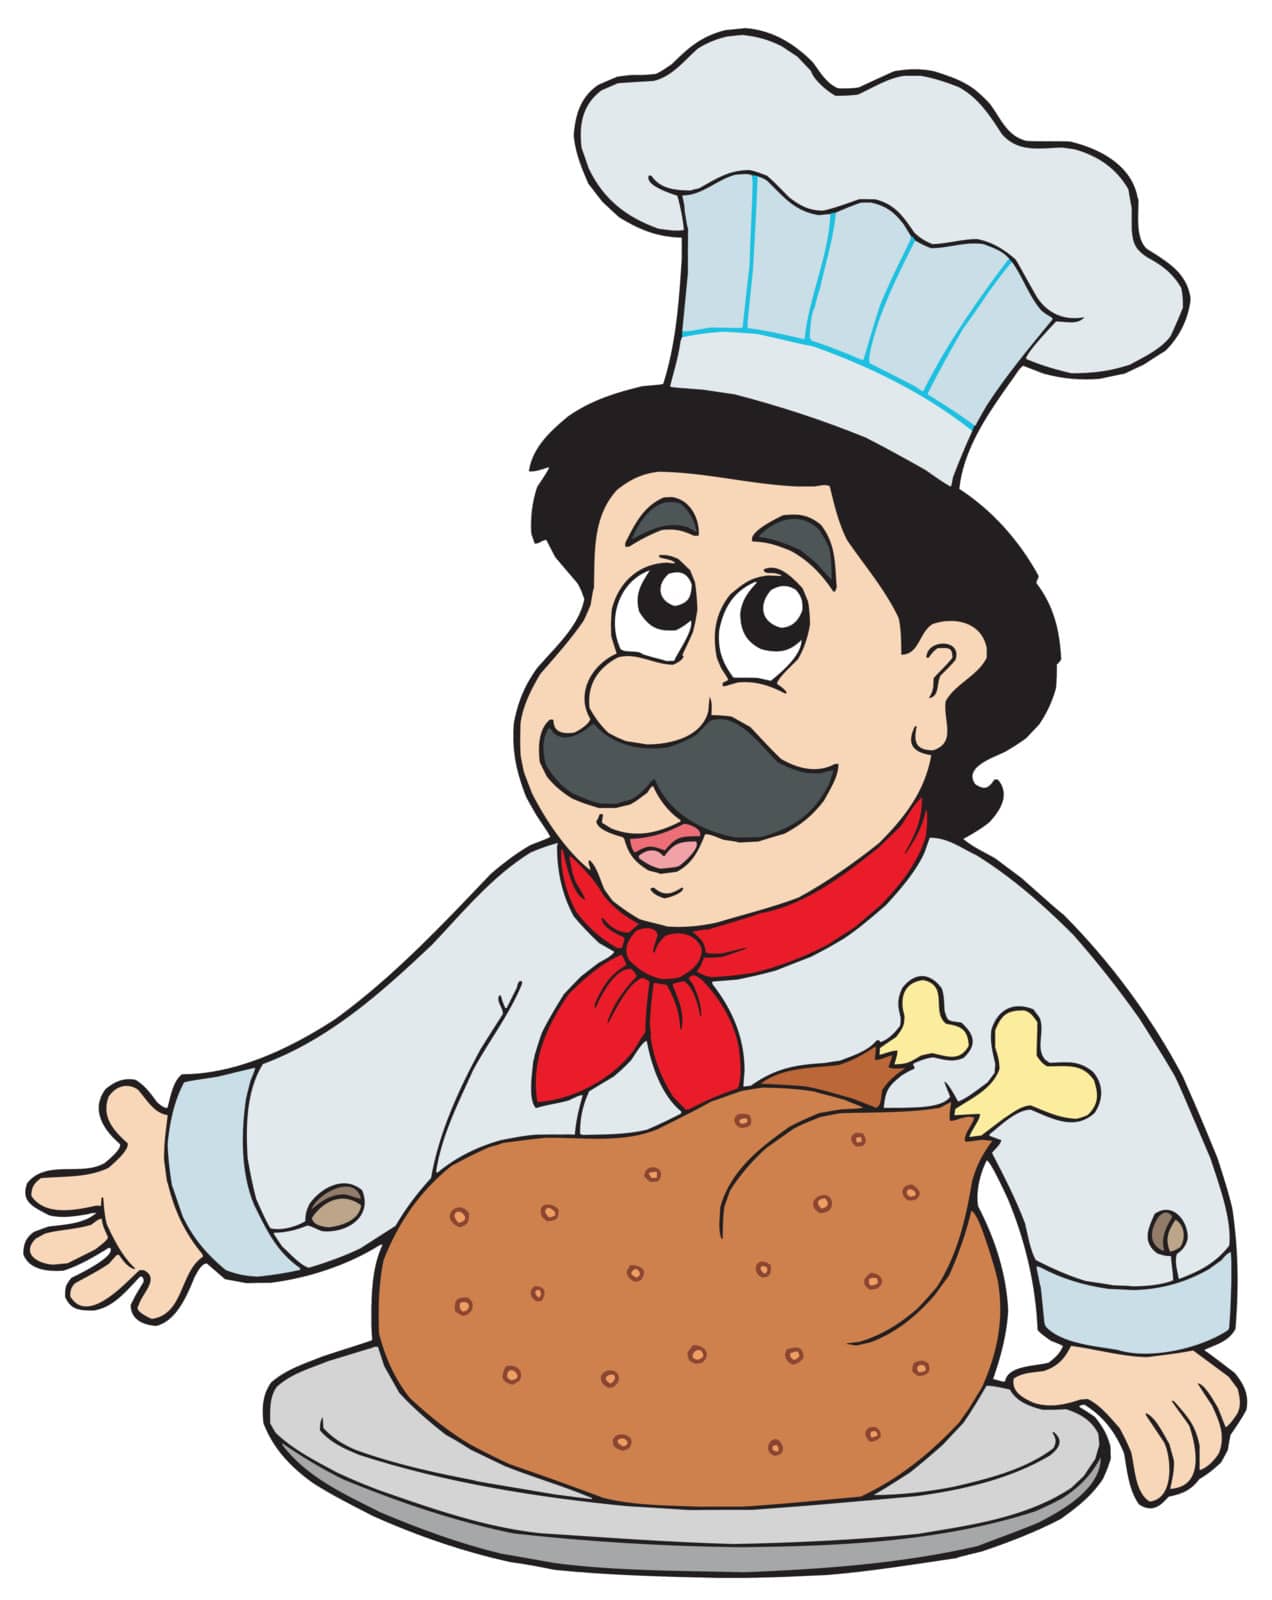 Cartoon chef with roasted meat - vector illustration.